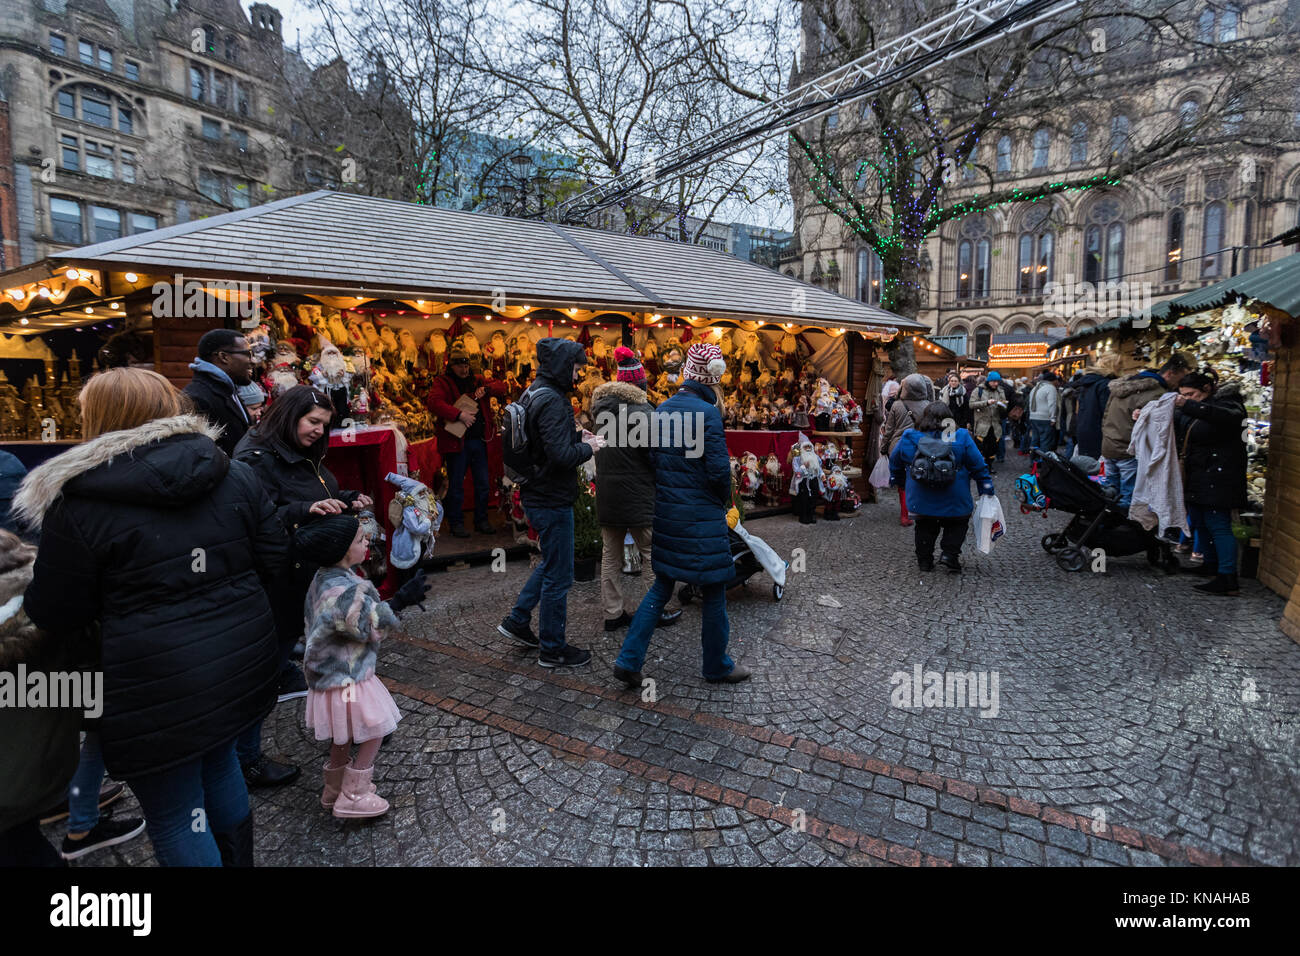 Shoppers And Revellers At Manchester Christmas Markets Around The City, Manchester, England, UK Stock Photo